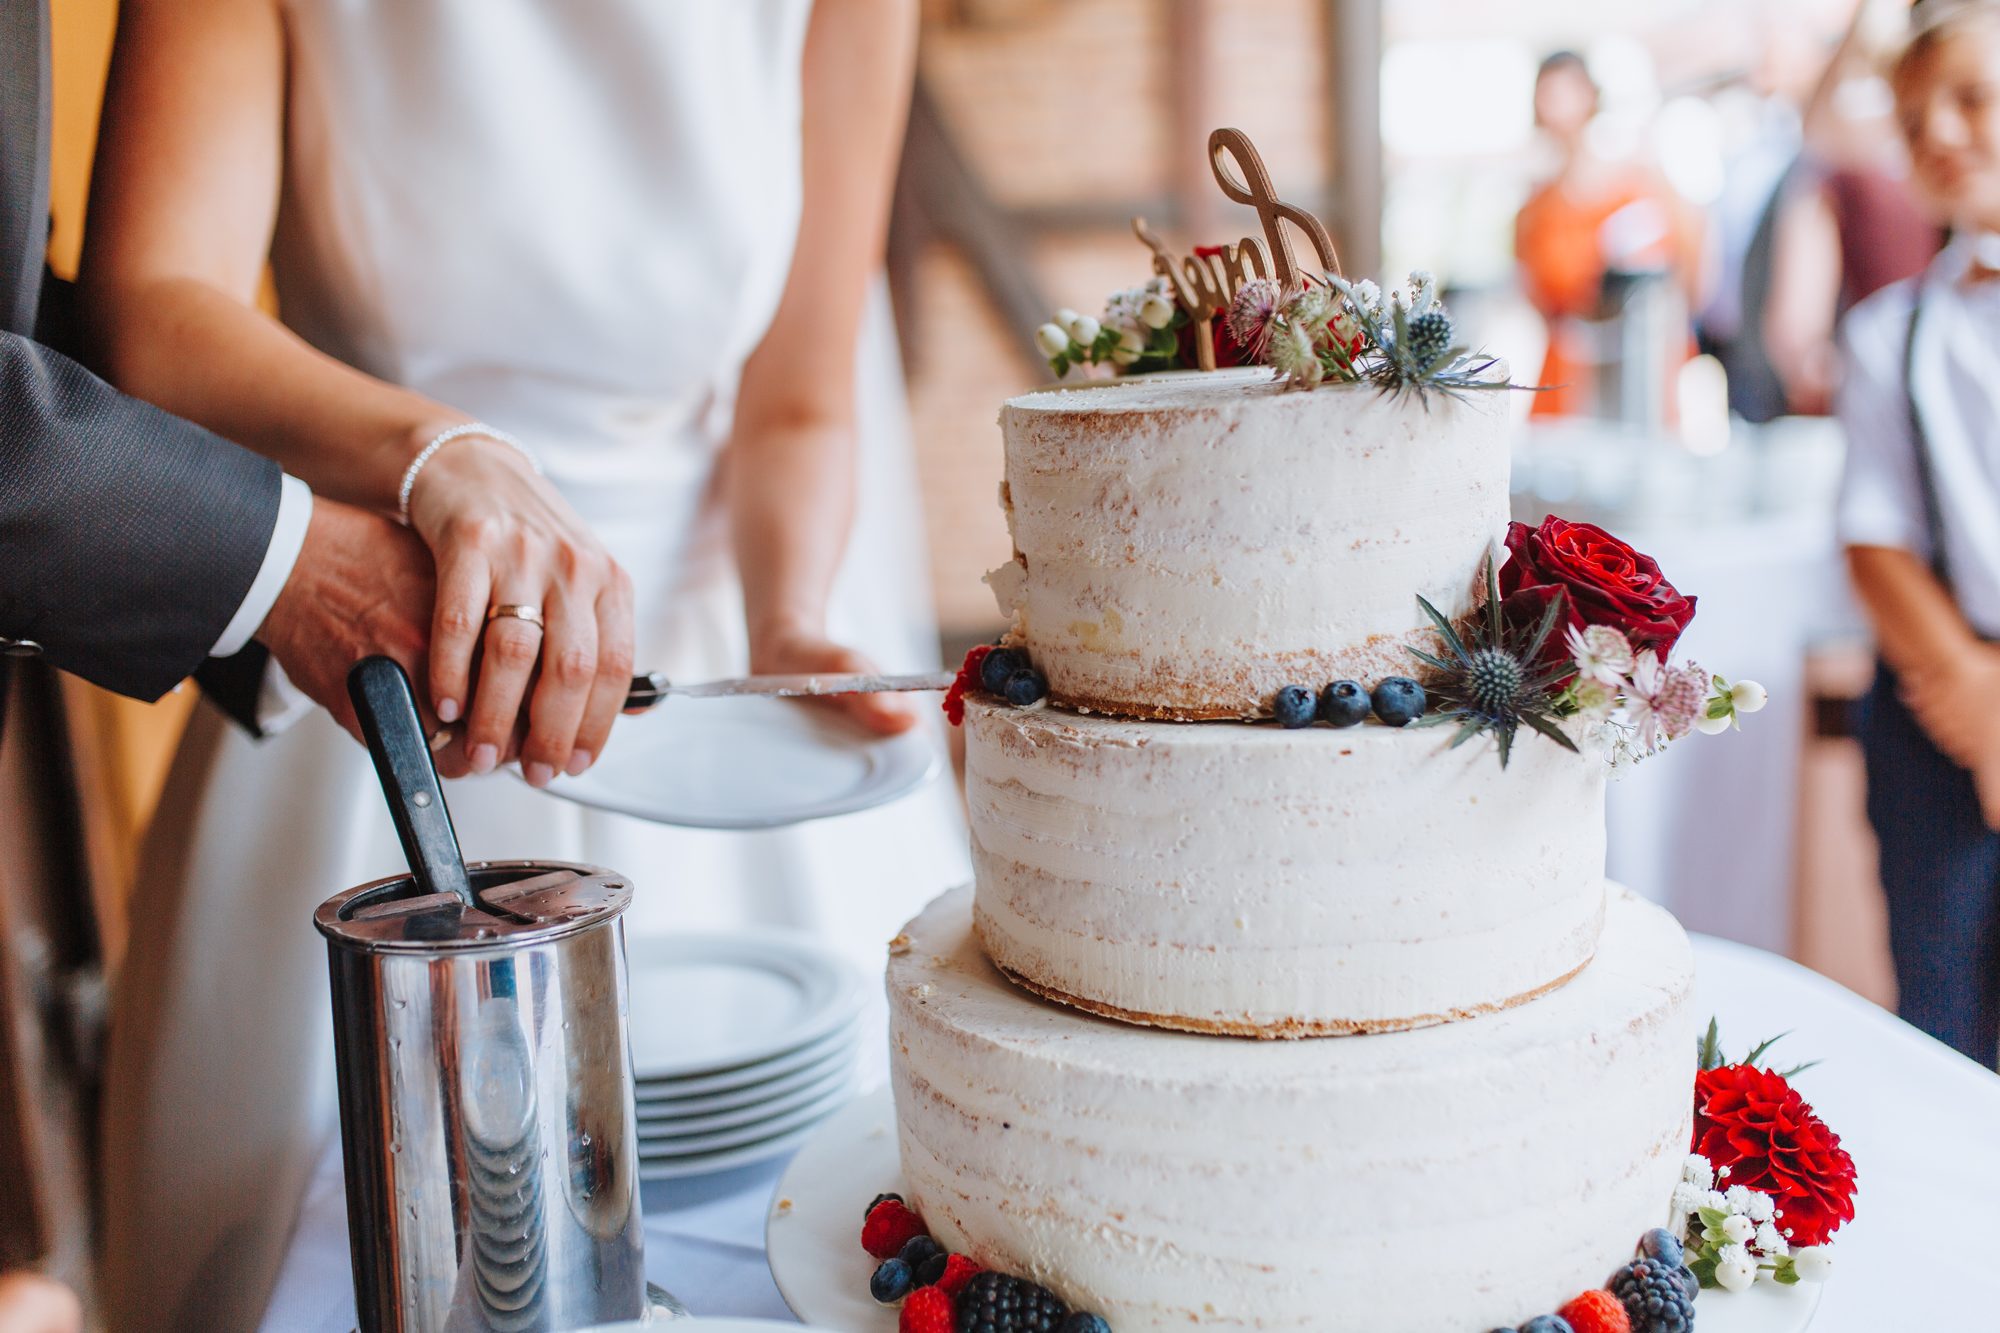 Wedding Cake Traditions Worth Keeping - Dining - Rich Entertainment Group